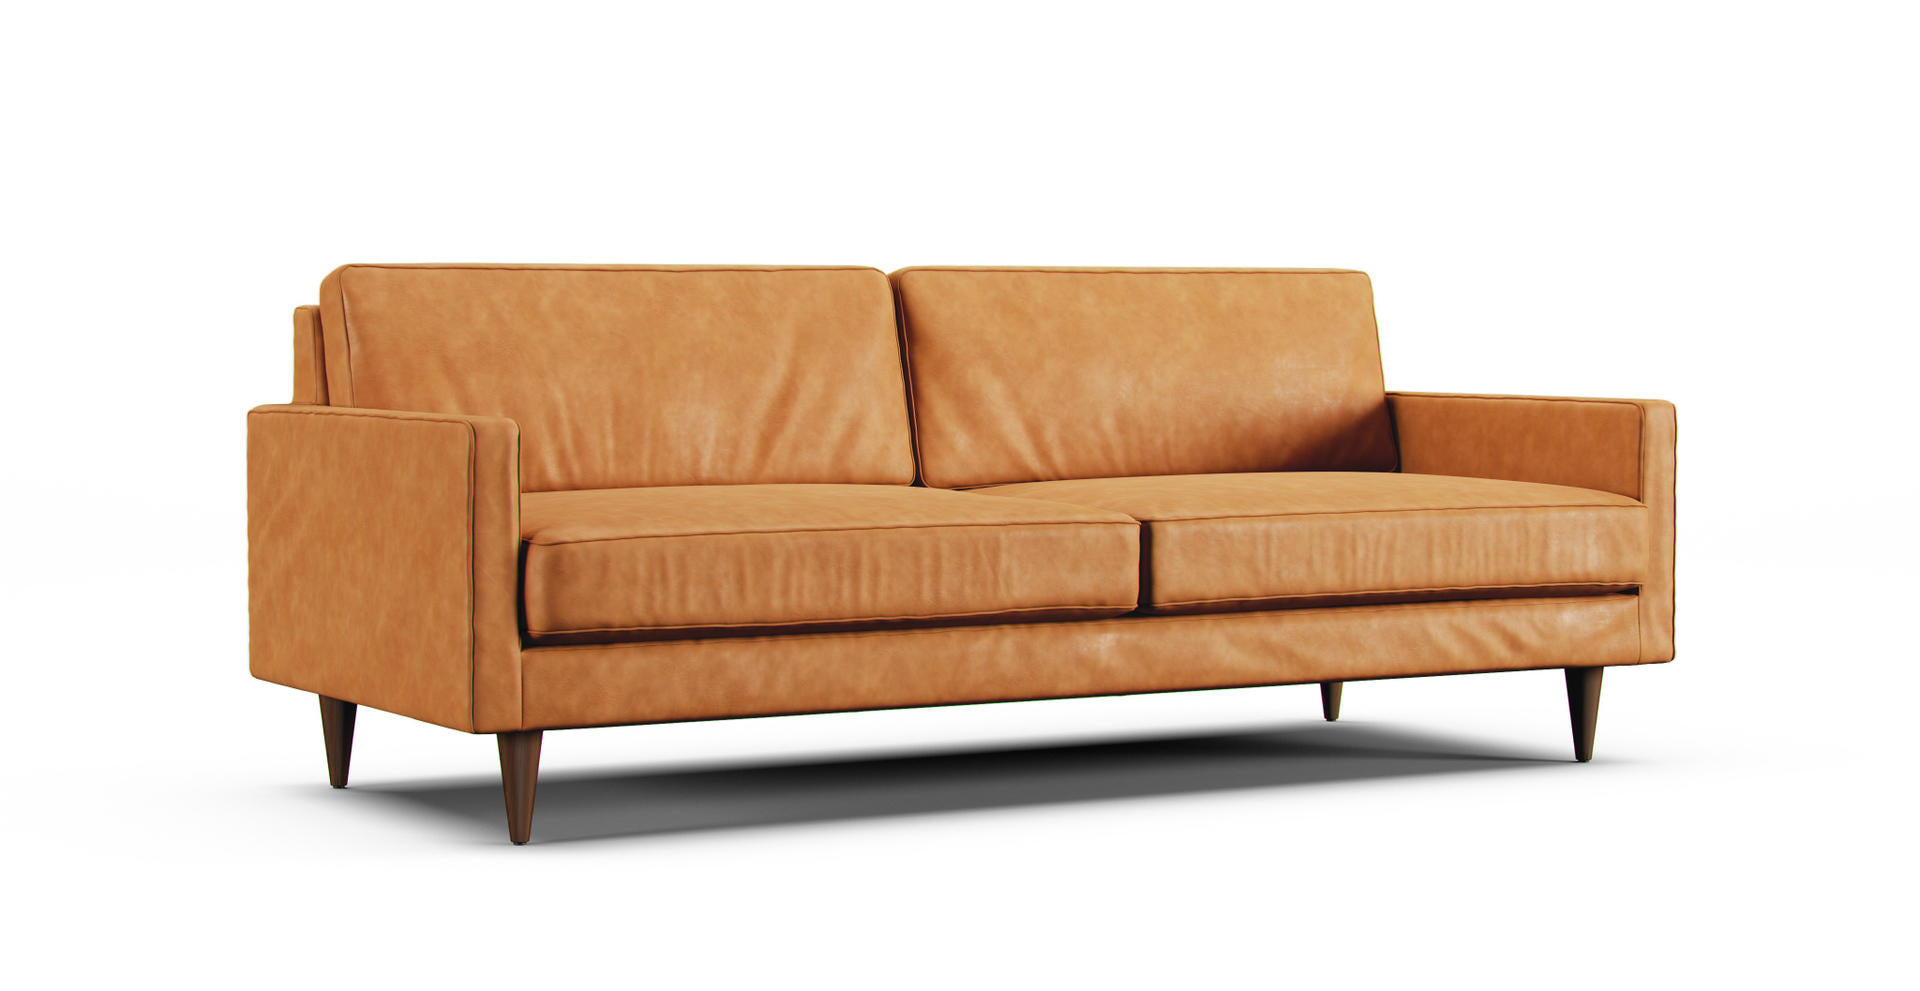 Joybird Eliot sofa with spill resistant and easy clean Savannah Saddle synthetic leather slipcover